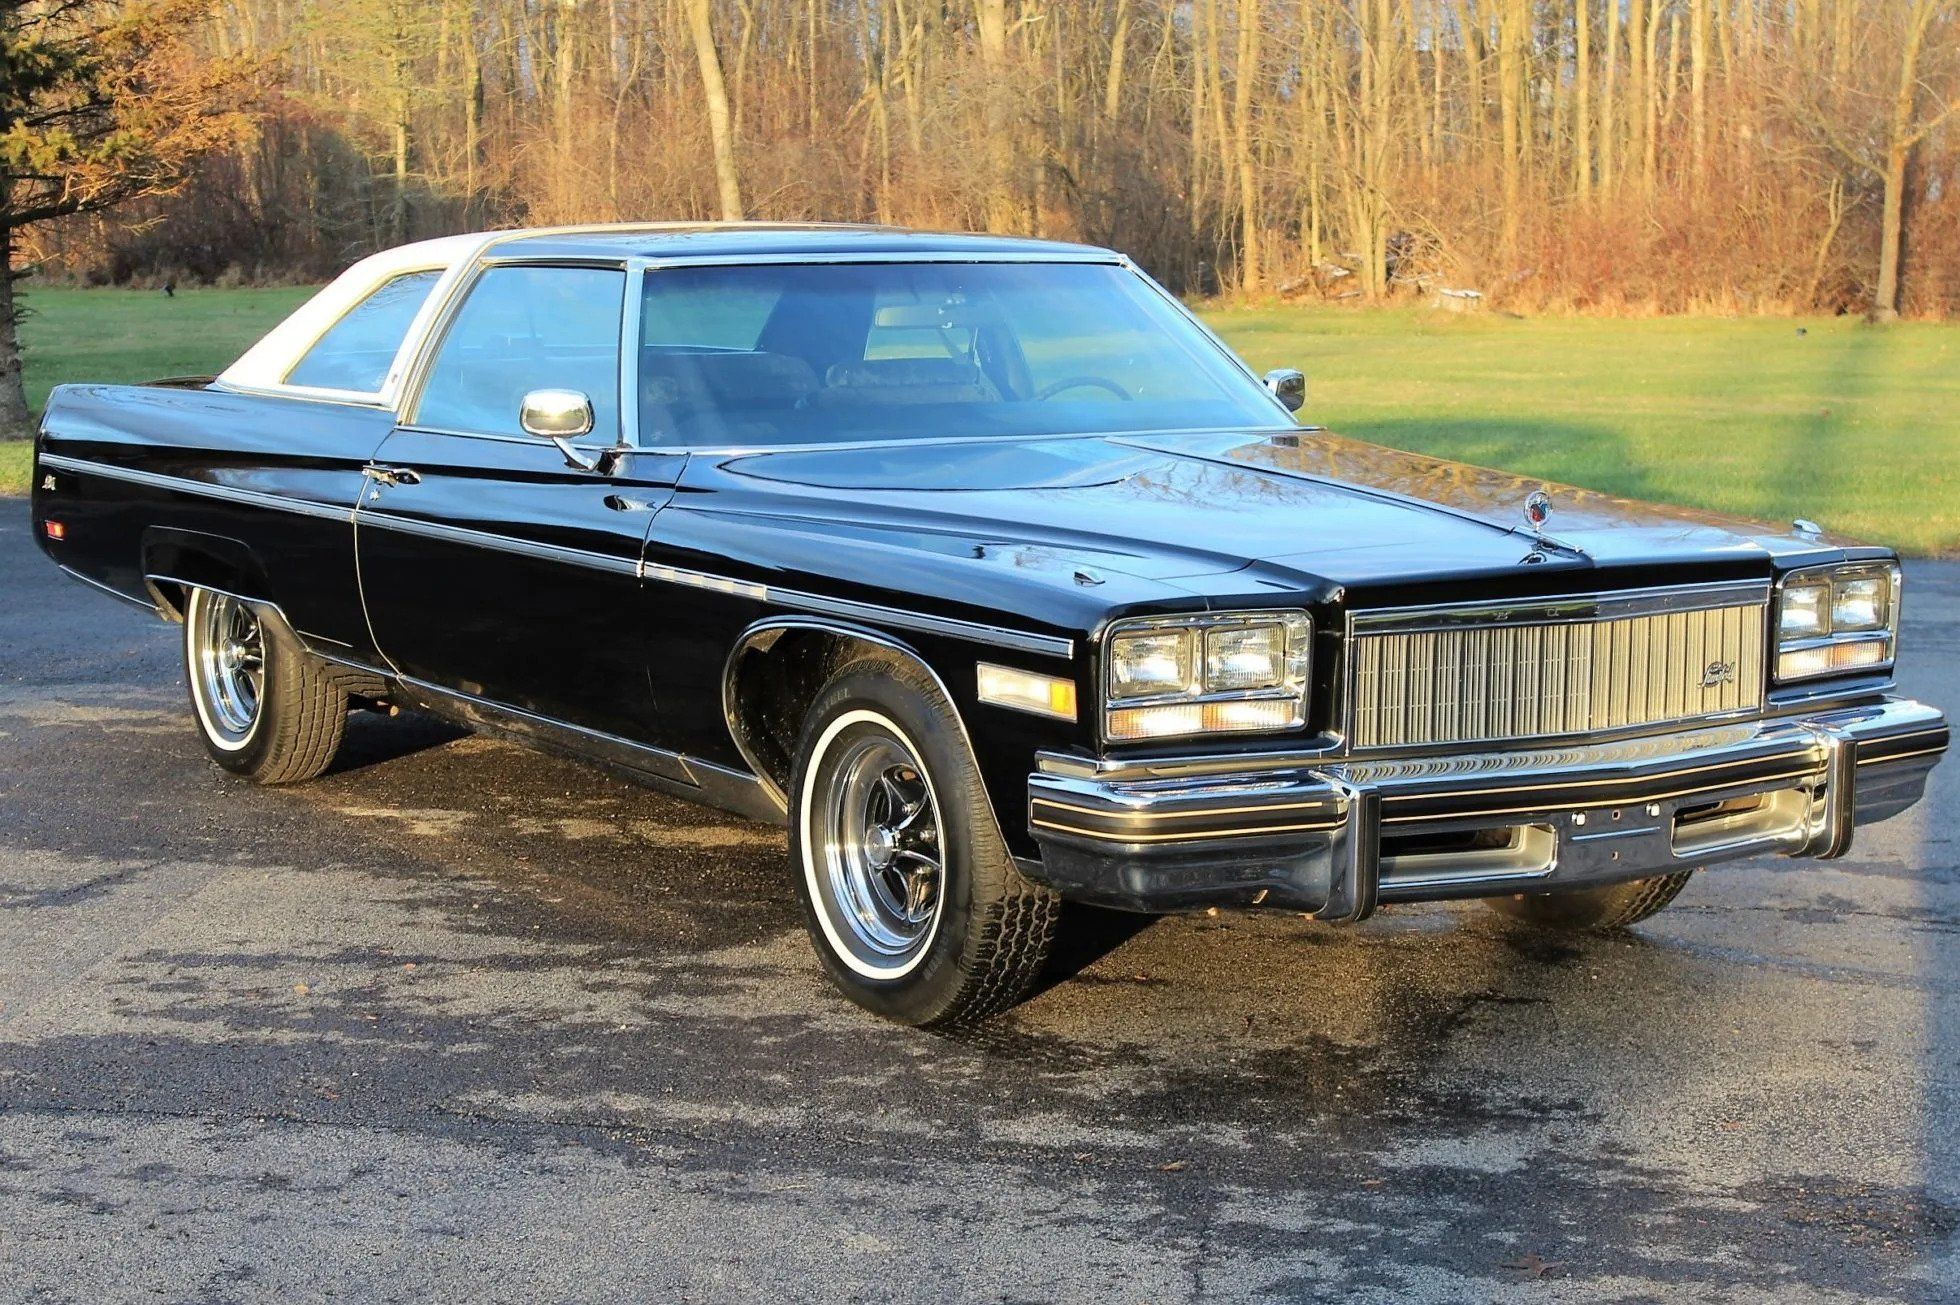 Black 1976 Buick Electra 225 Limited Coupe